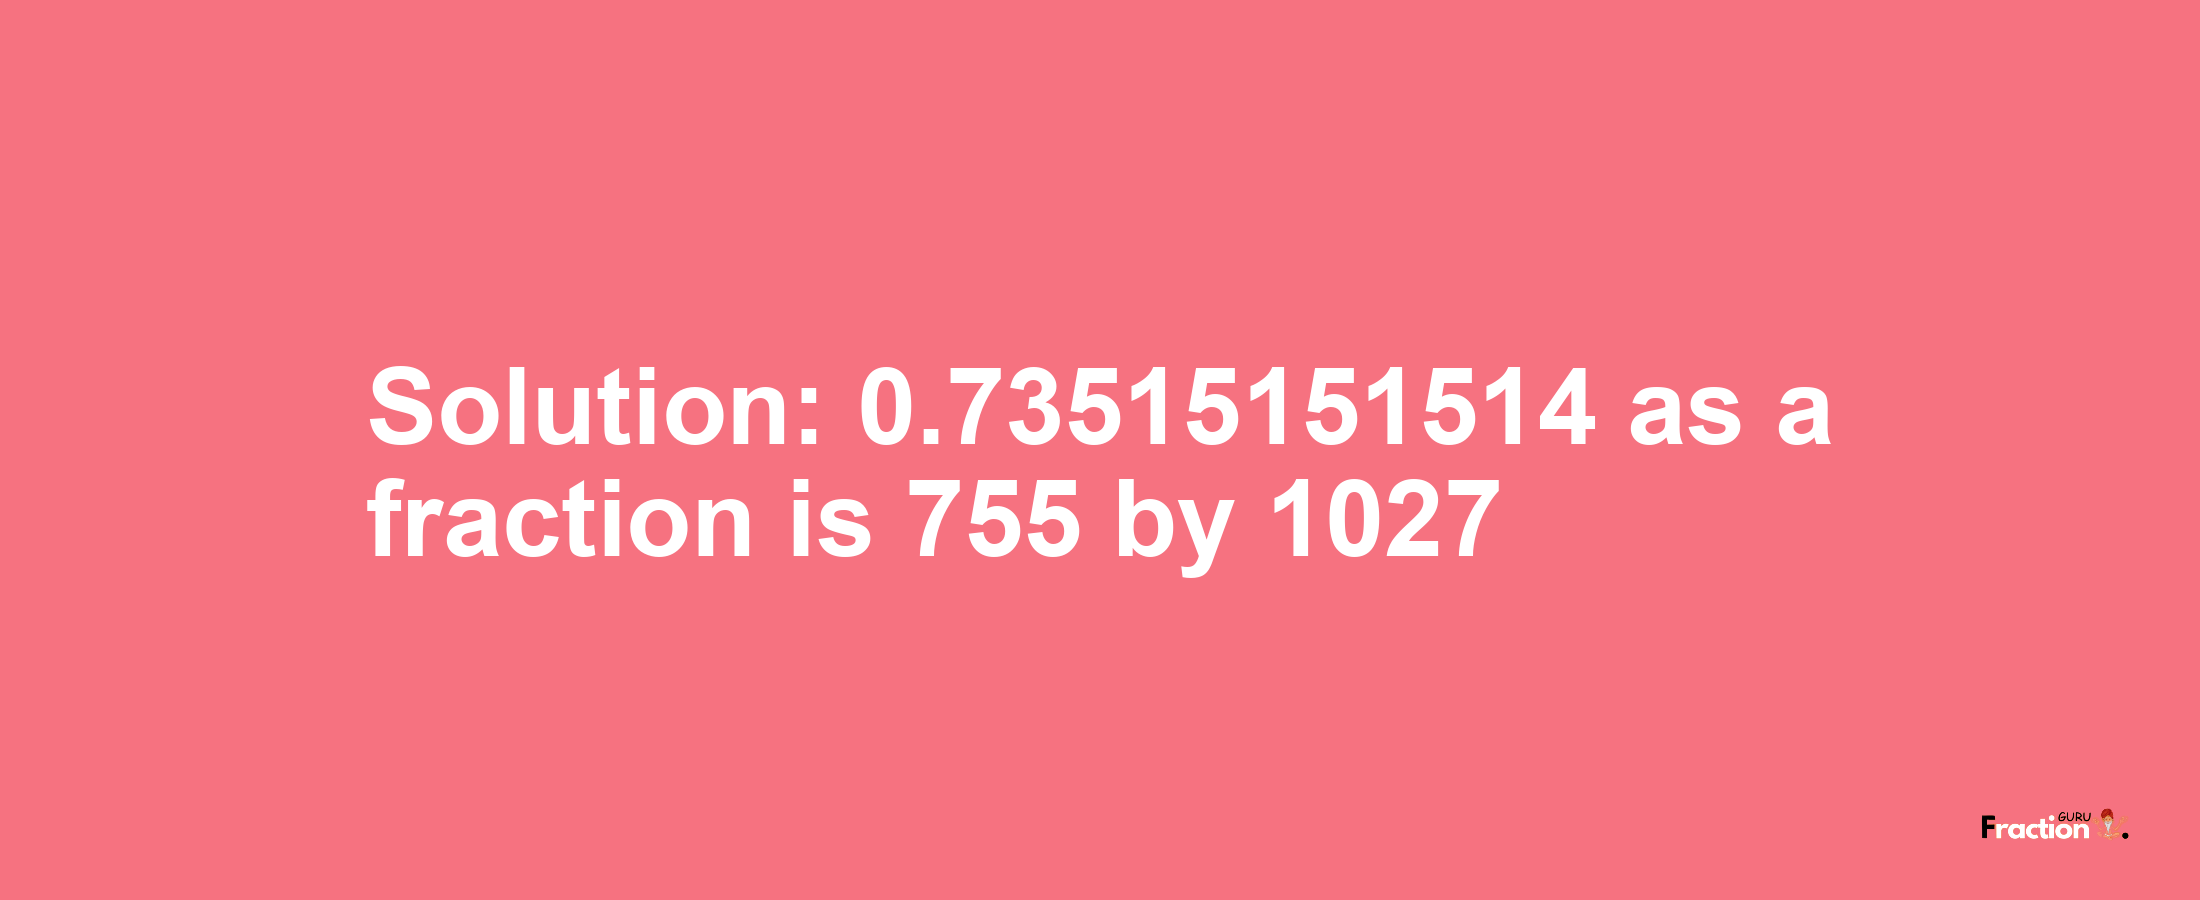 Solution:0.73515151514 as a fraction is 755/1027